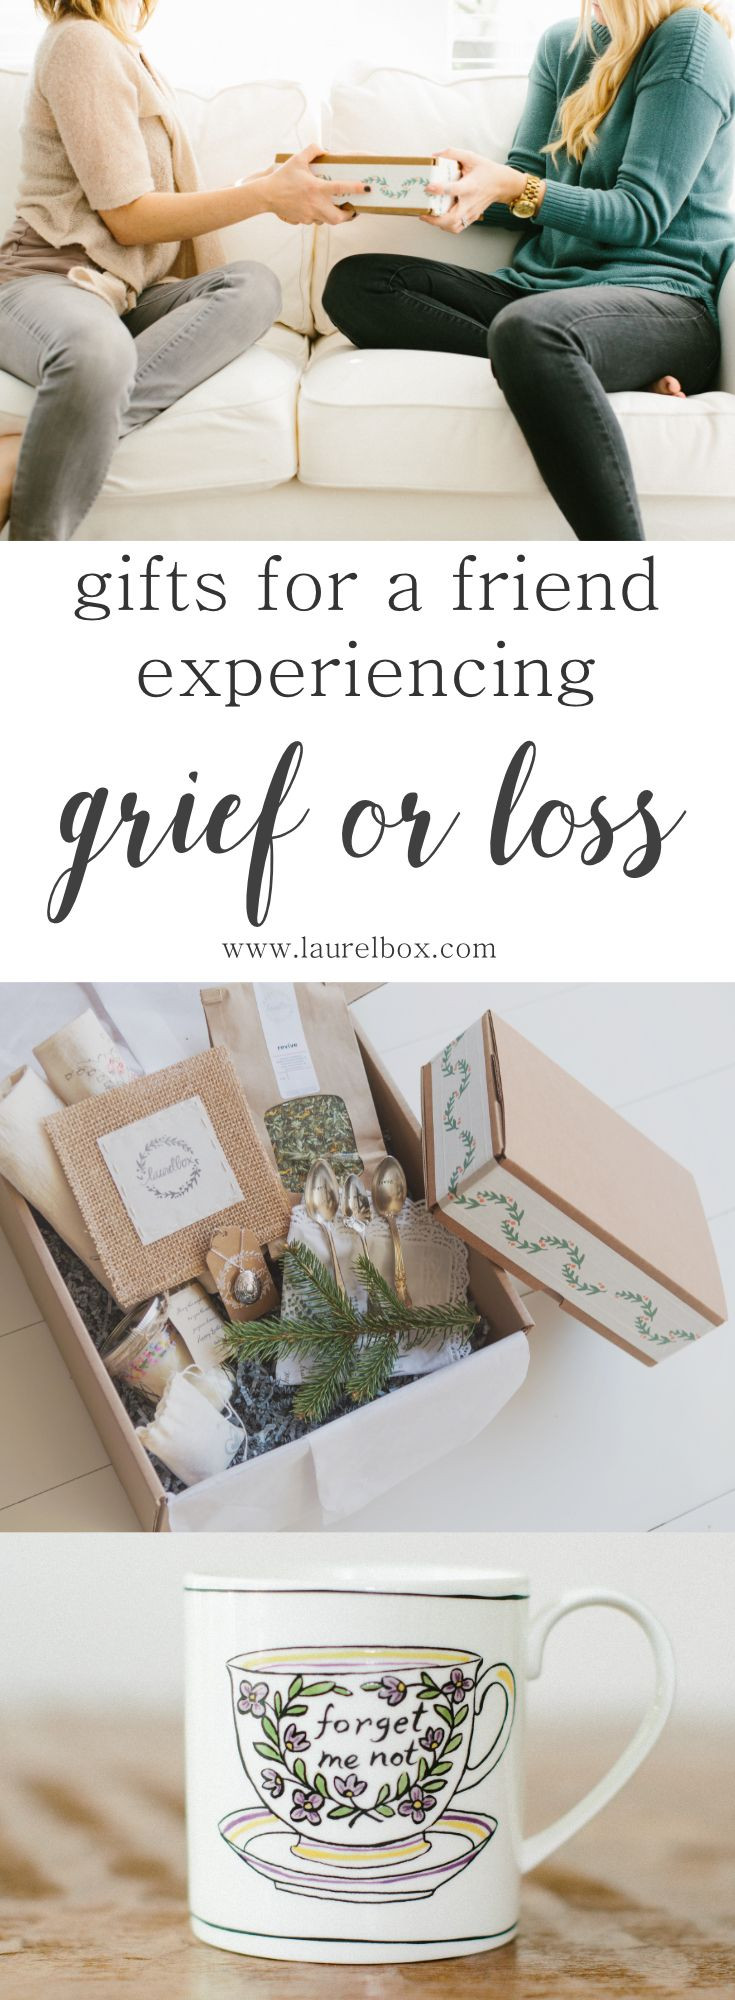 Gifts For Grieving Children
 Check out Laurel Box Their shop offers thoughtfully hand